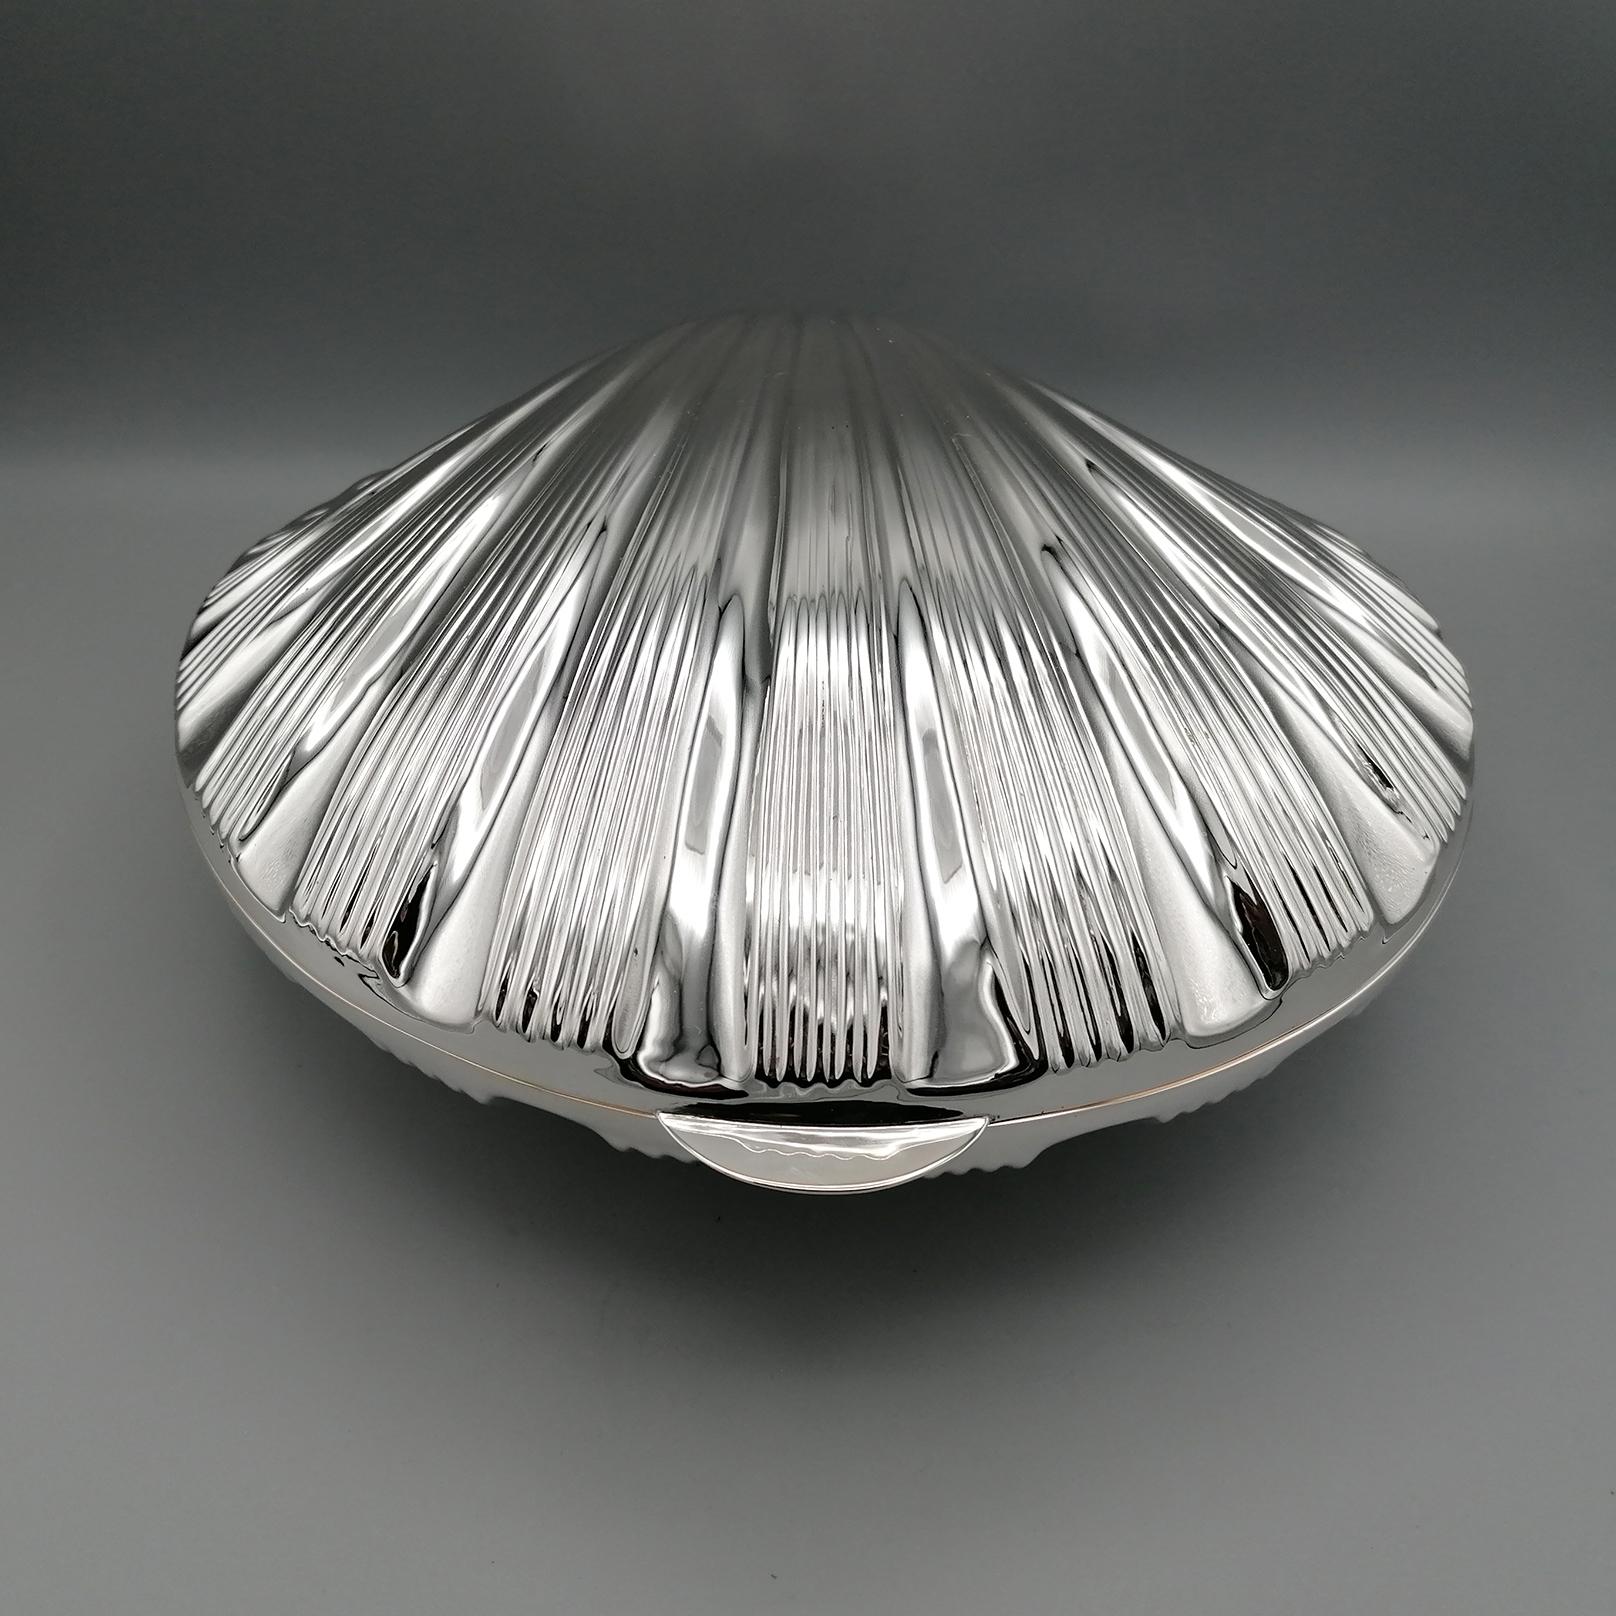 Shell-shaped box in solid 800 silver  completely handmade. 
The lower part and the lid have been shaped and chiseled by faithfully copying the veins and structure of the Chlamys shell and then joined by a hinge.
Under the box, three seahorses have